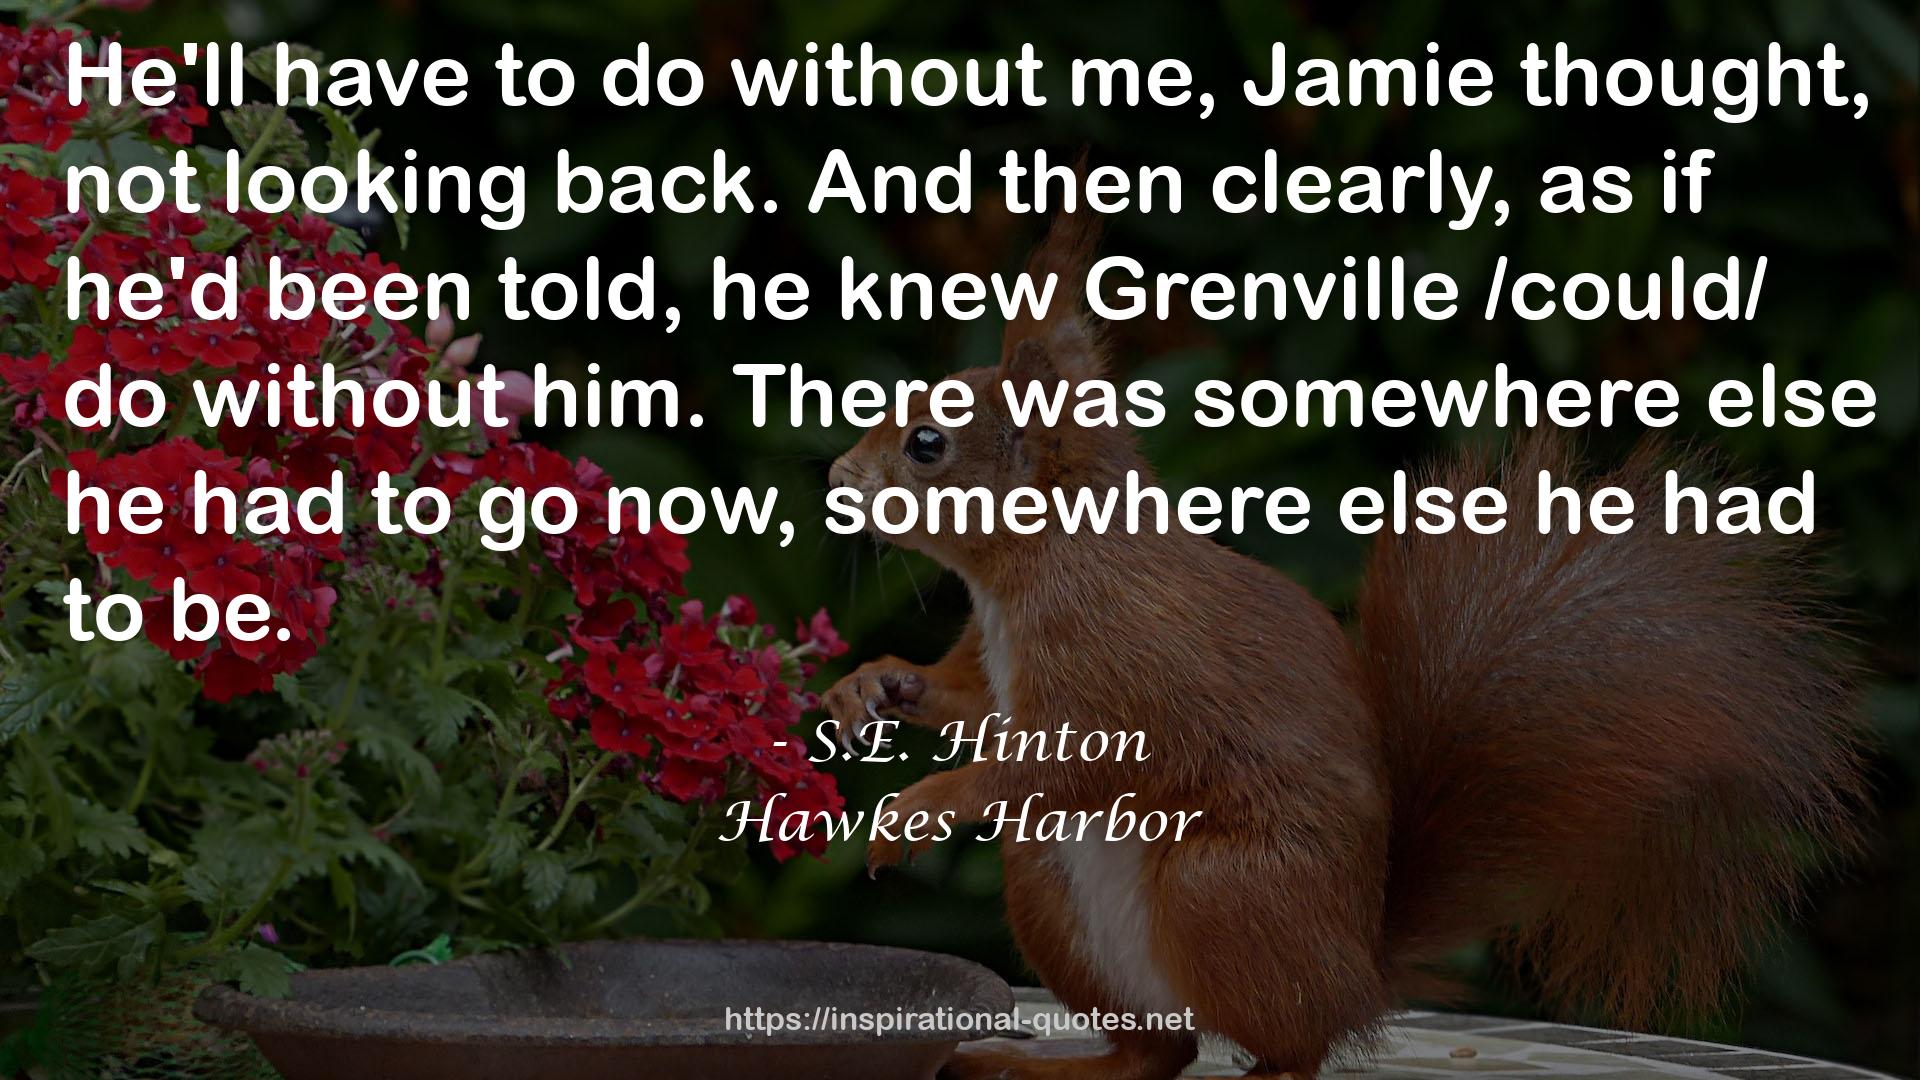 Hawkes Harbor QUOTES